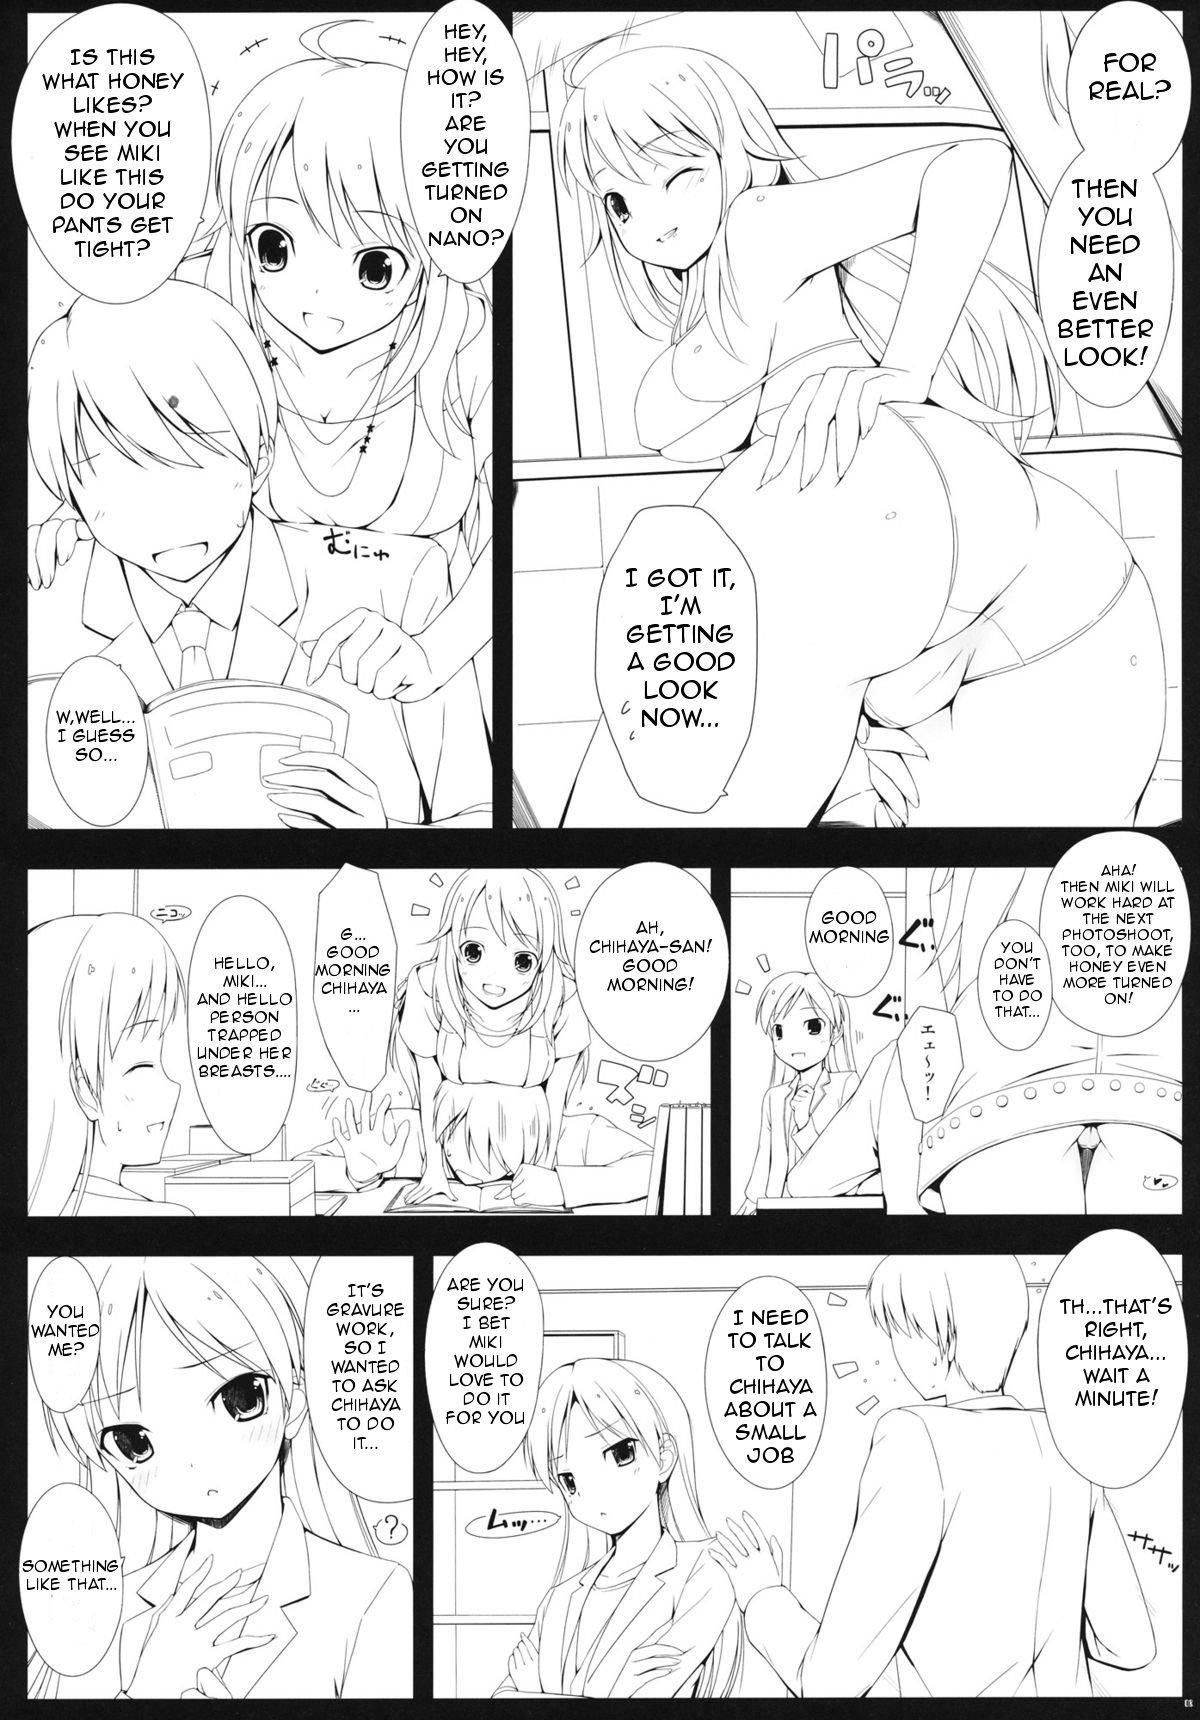 Euro Porn BAD COMMUNICATION? 13 - The idolmaster Blow - Page 5